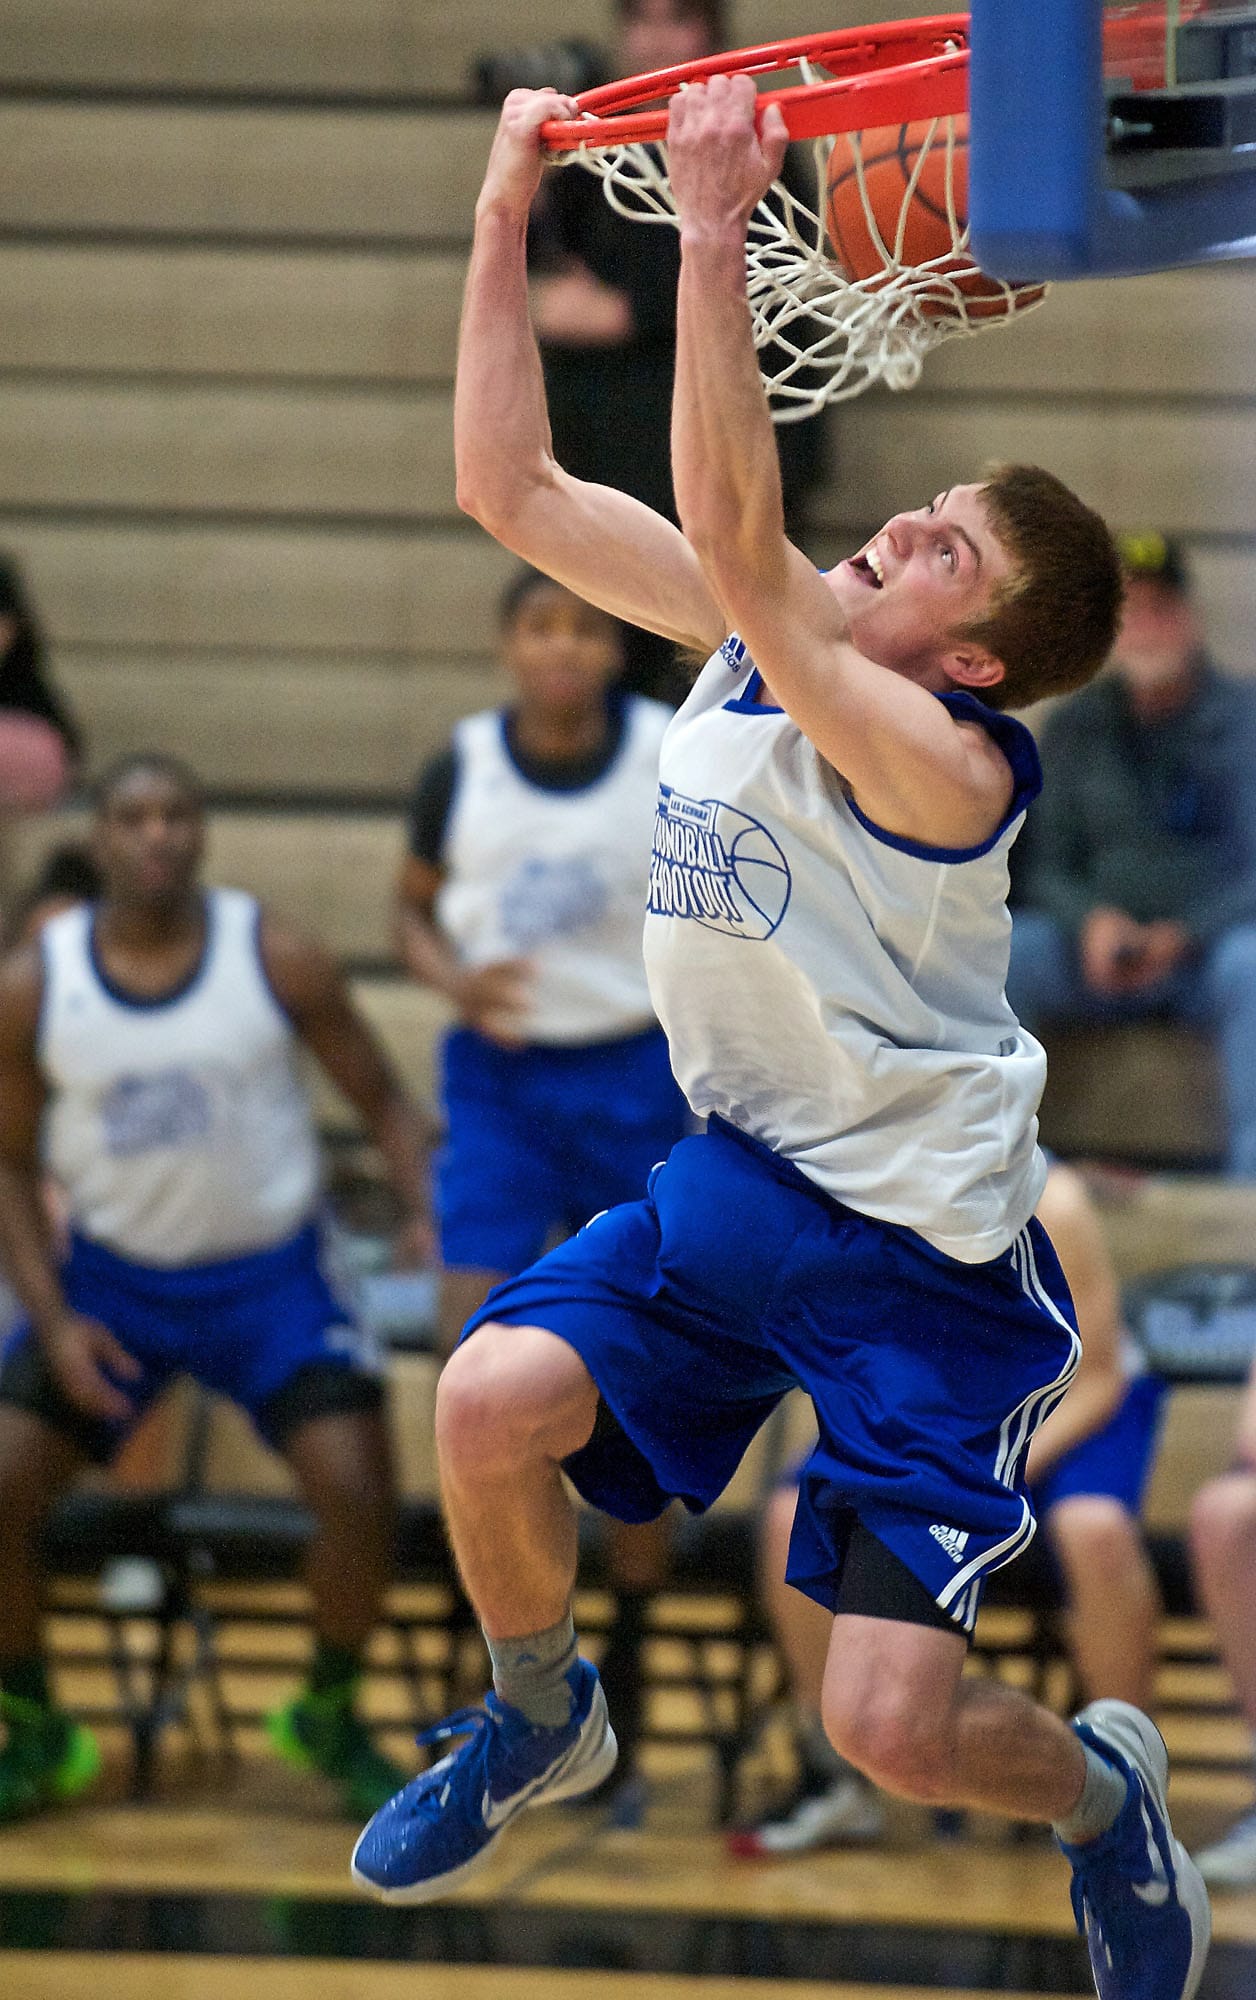 Hockinson's Jack Klodt throws down a mean reverse dunk to win the slam dunk contest during the Roundball Shootout at Clark College on Sunday.